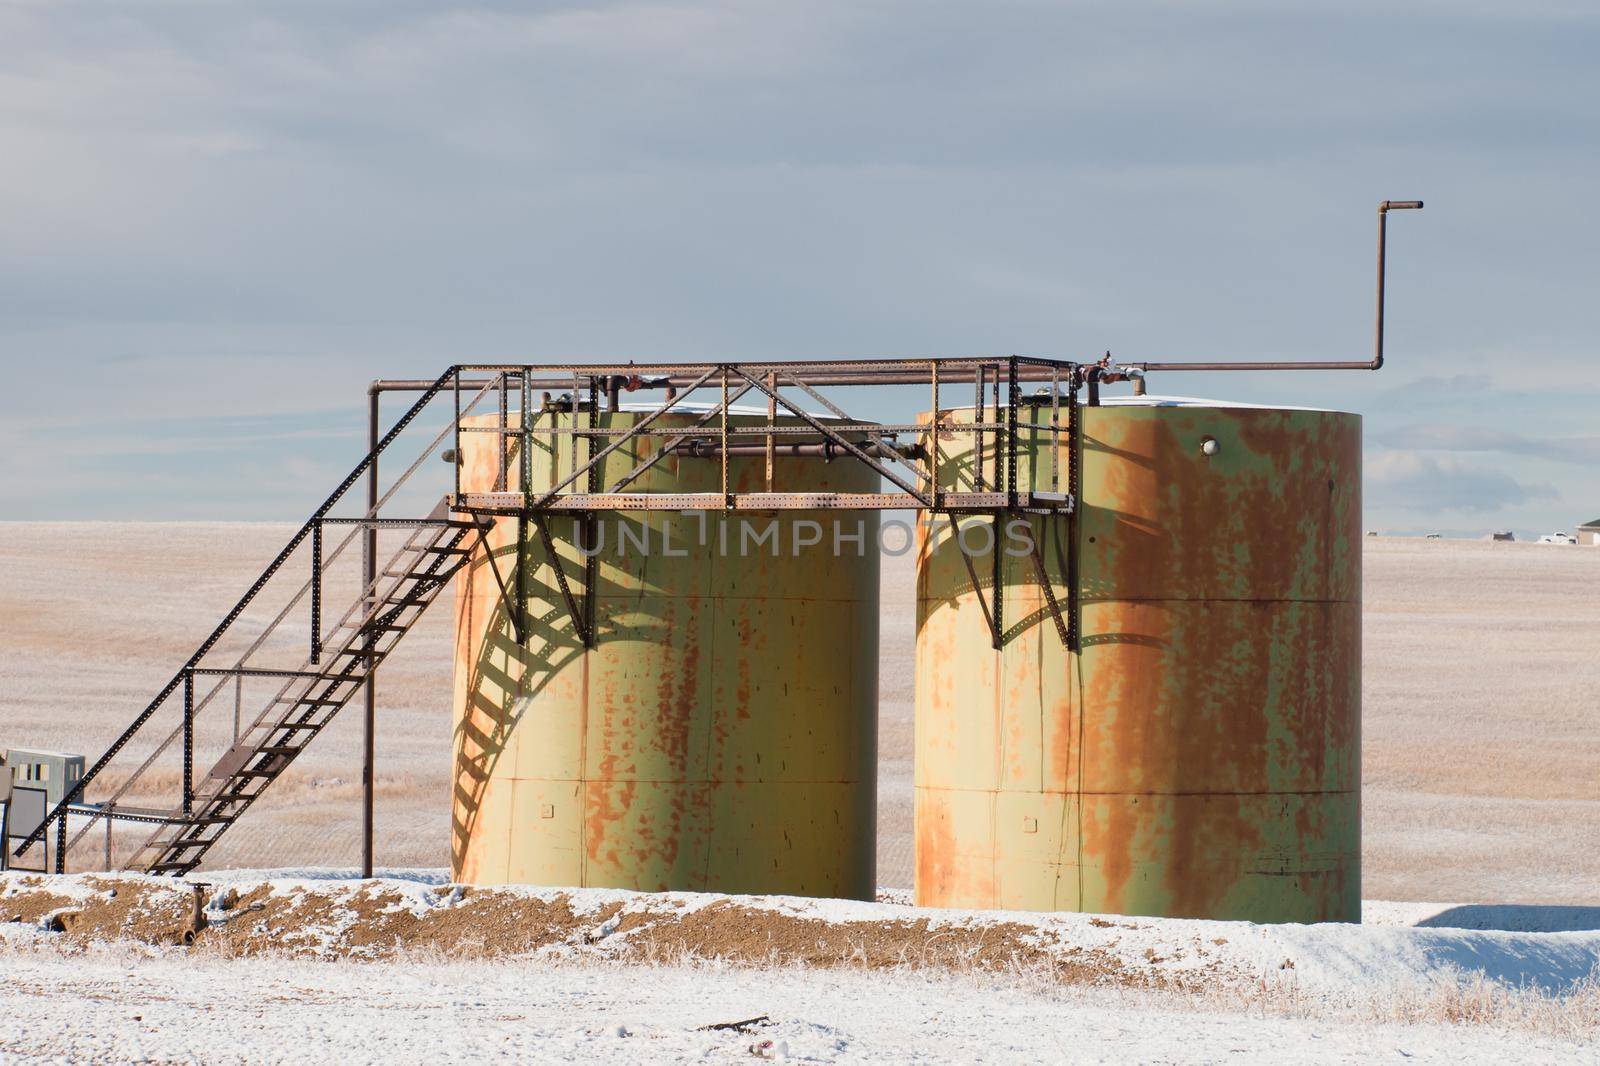 Rusted industrial storage tanks in winter landscape.